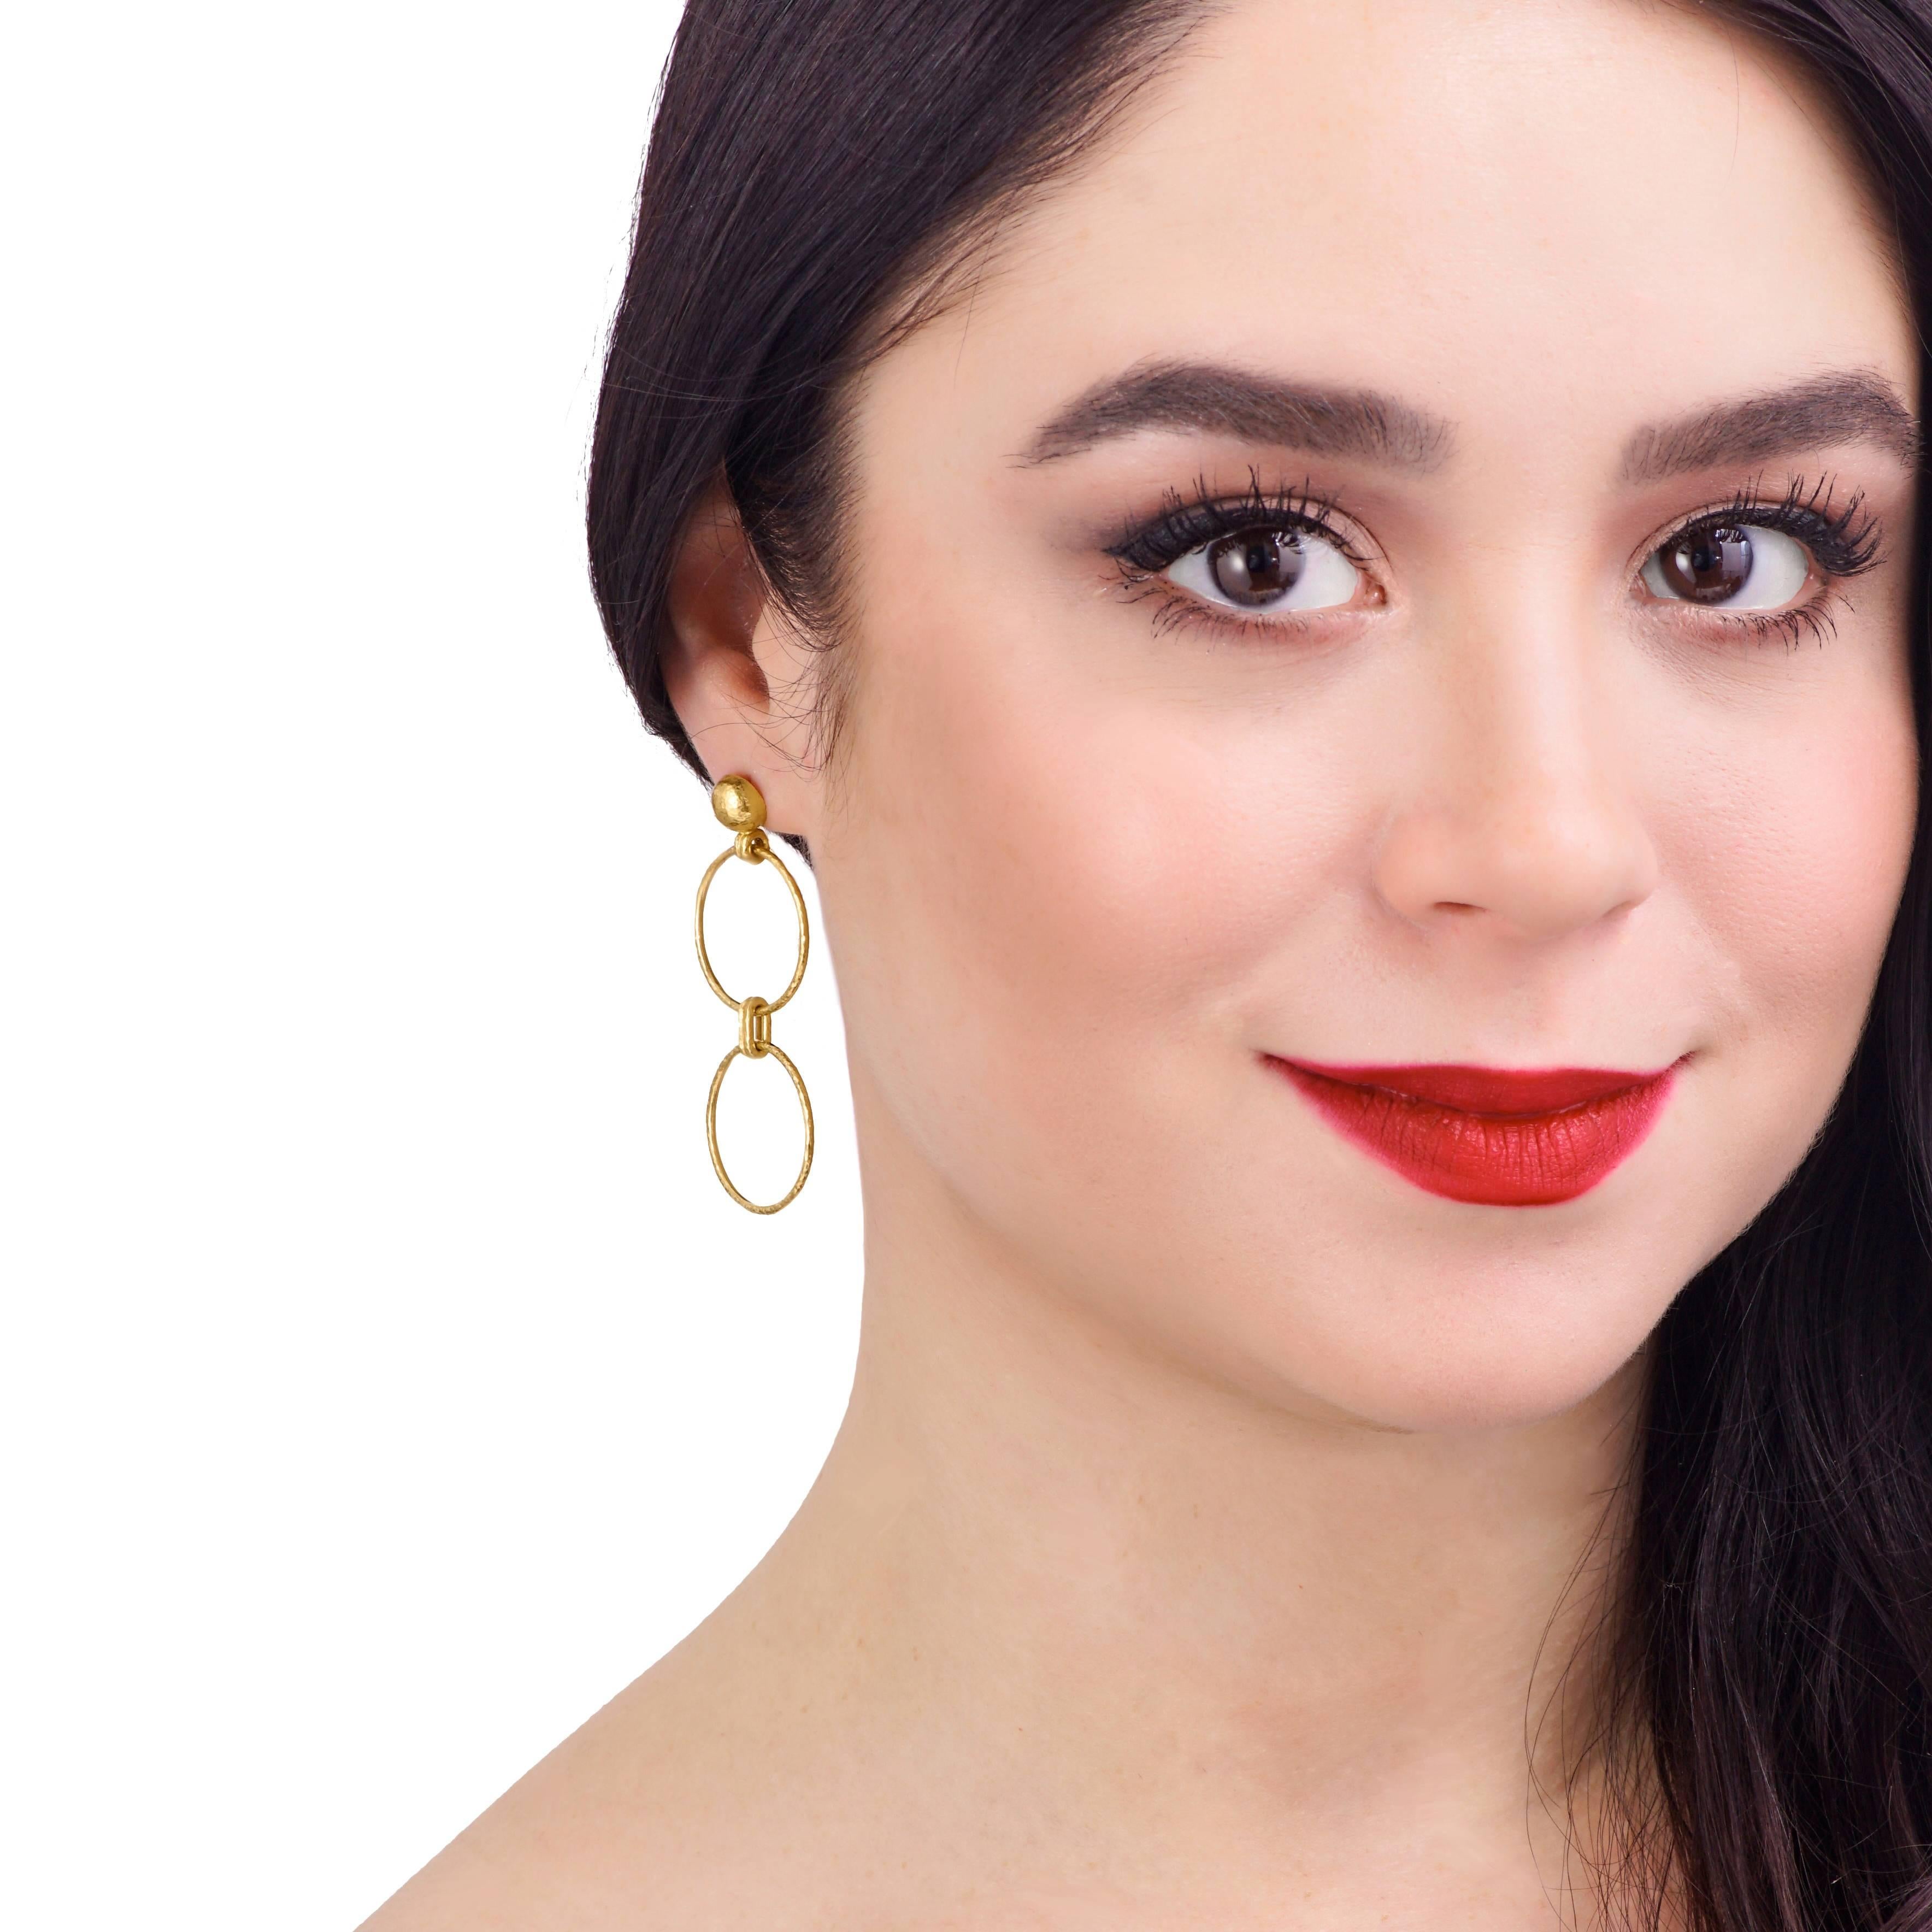 Circa 2000s, 24k, Gurhan, Turkey.  These chic double hoop earrings by Gurhan combine modernist aesthetics with old world élan. Their signature 24-karat yellow gold is finished in a hand-hammered texture, and at 1 1/4 inches long, they are